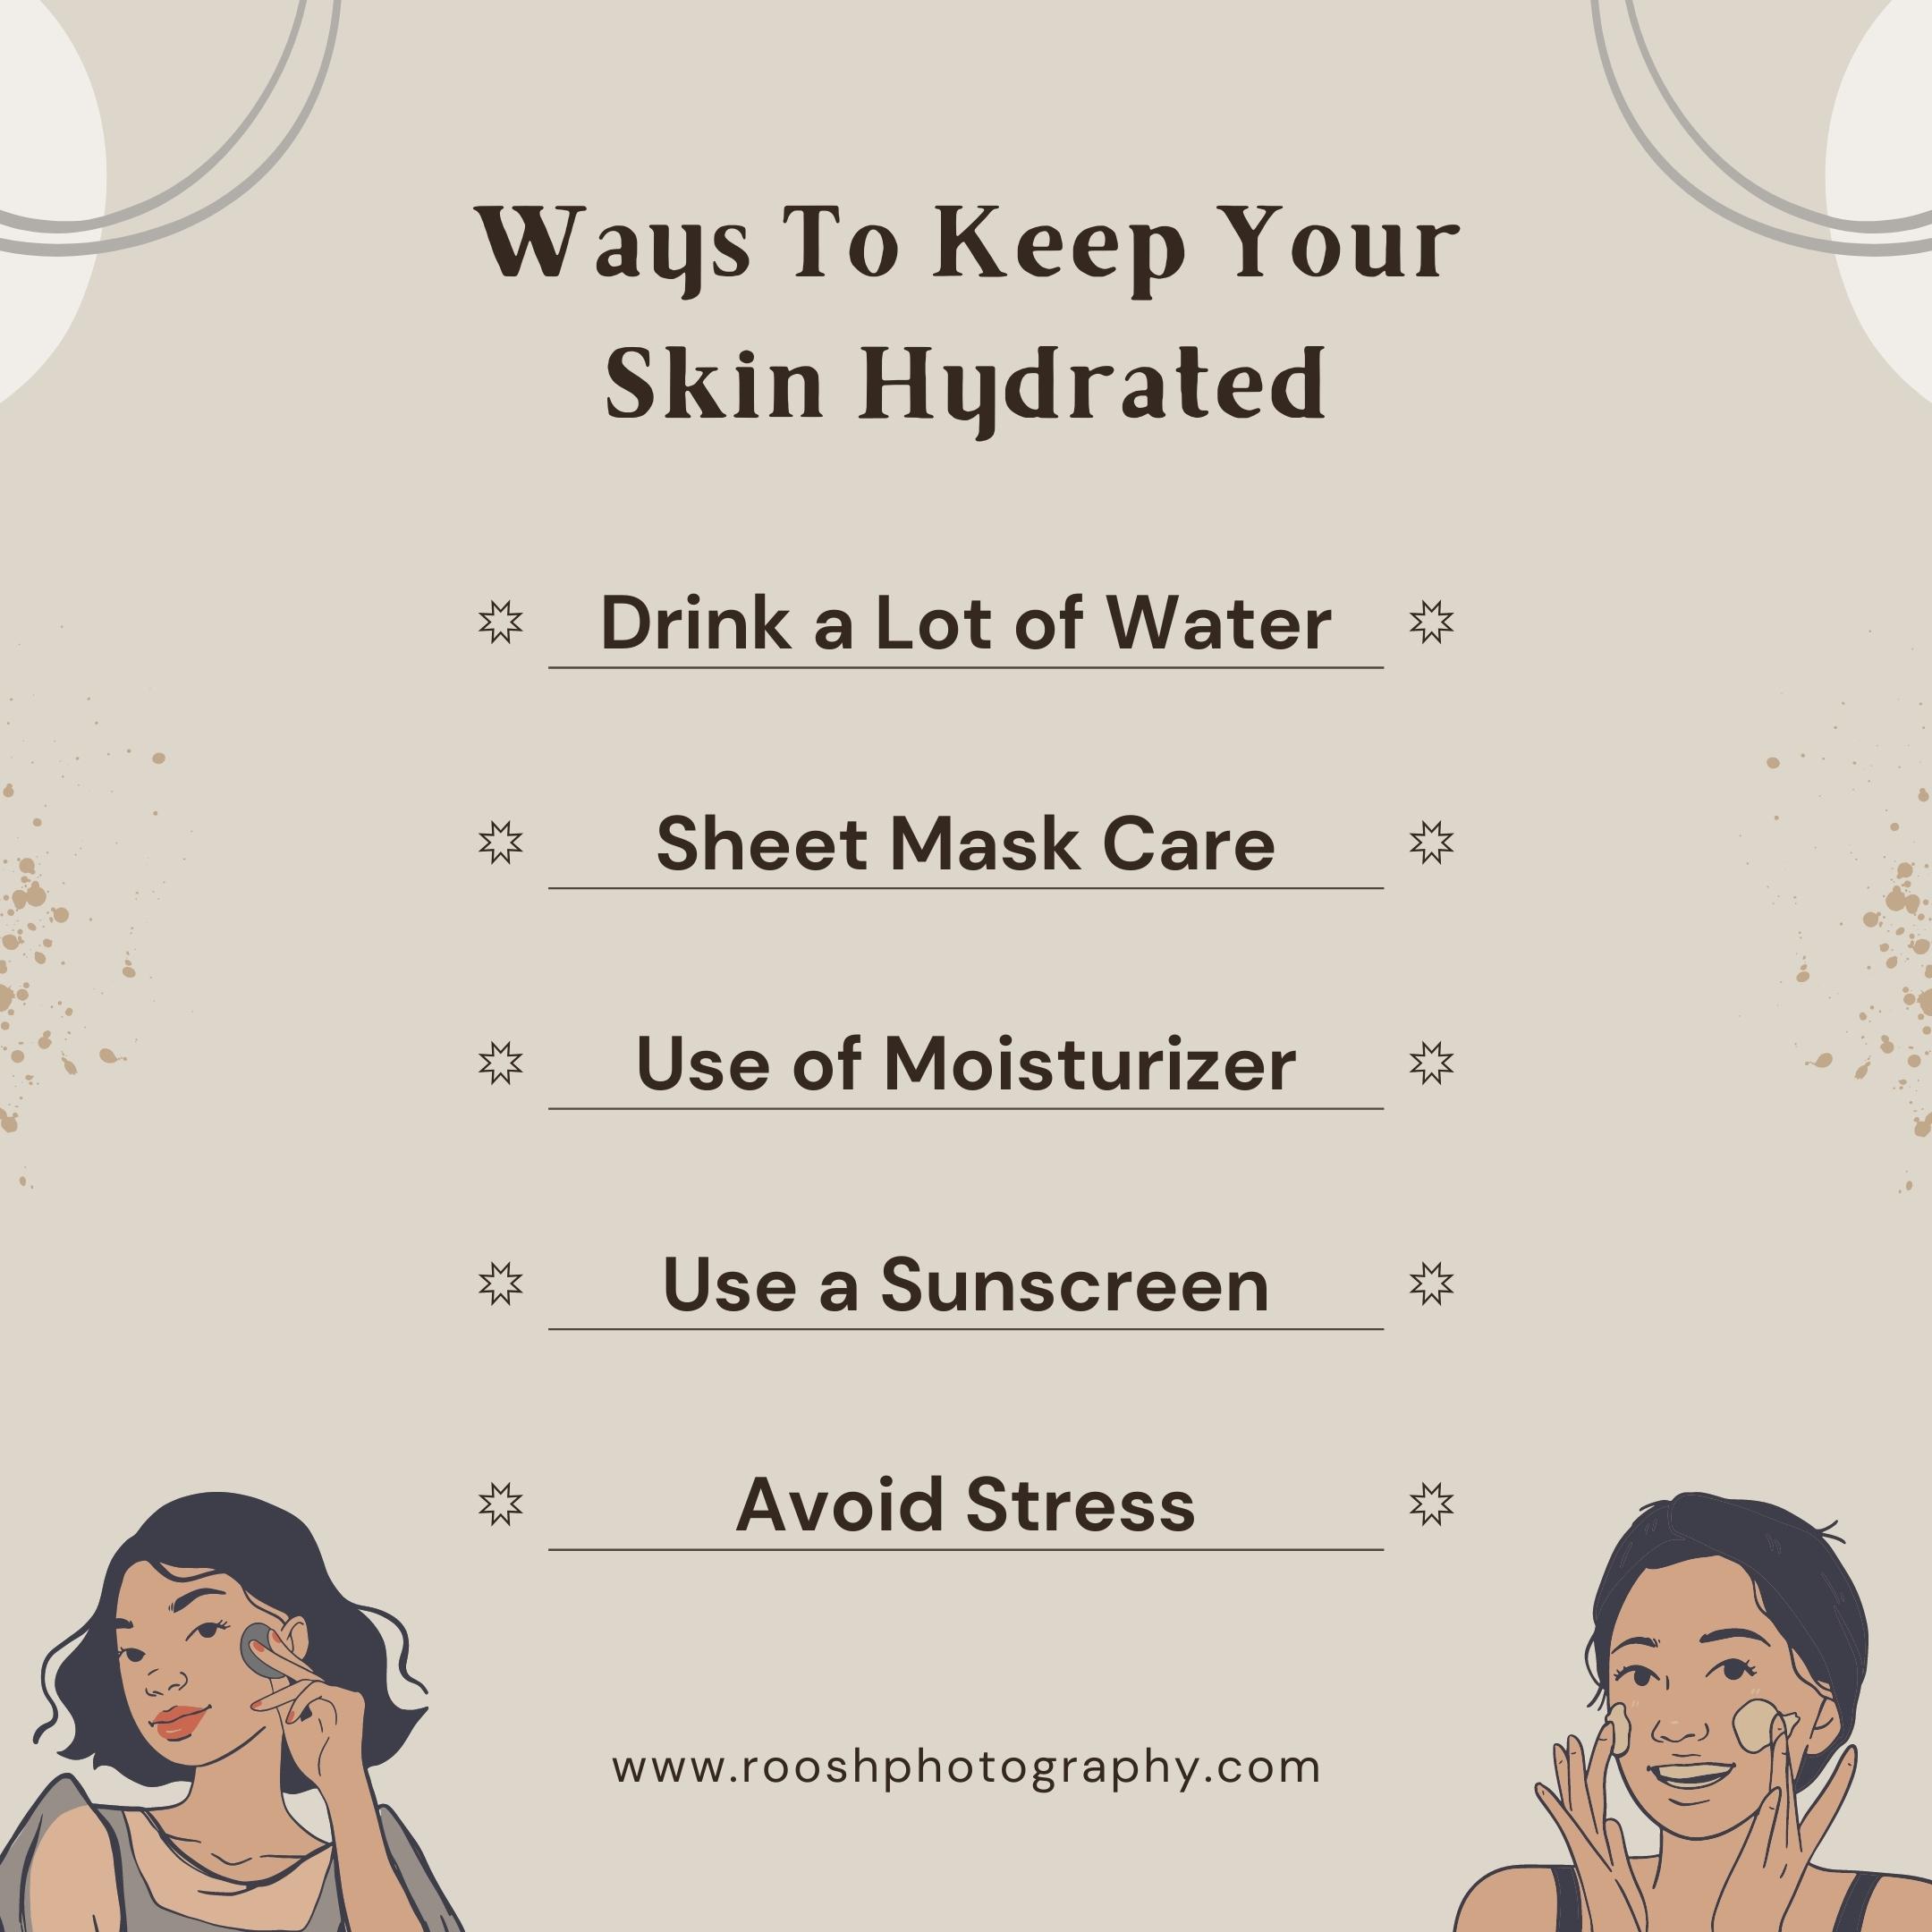 Ways to keep your skin hydrated